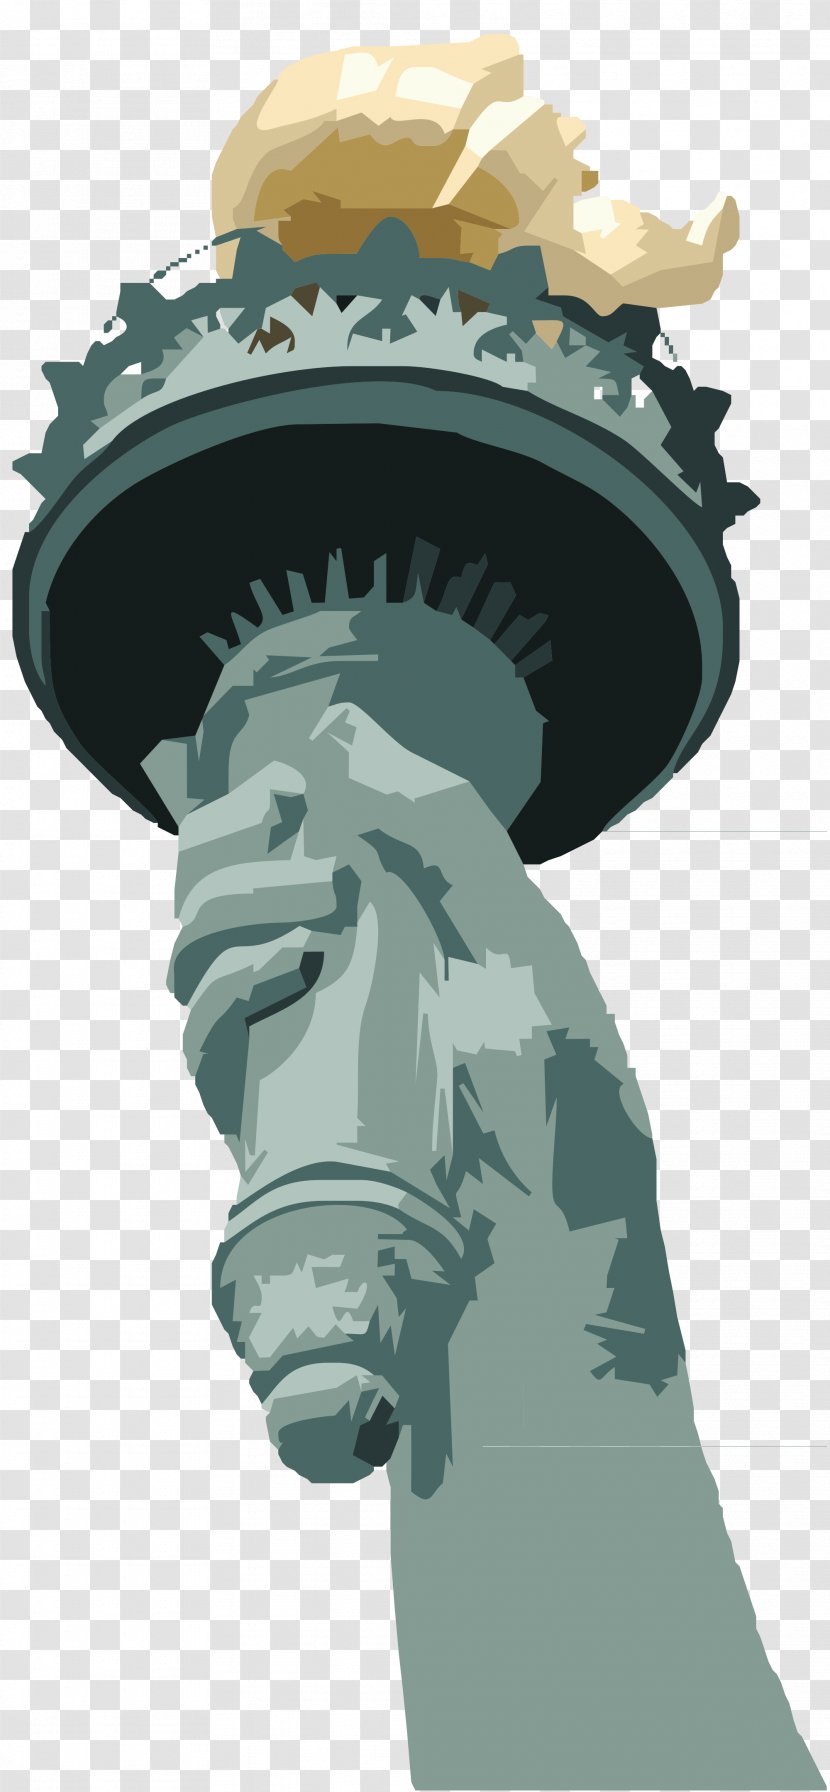 Statue Of Liberty Torch - Cryptoanarchism Transparent PNG